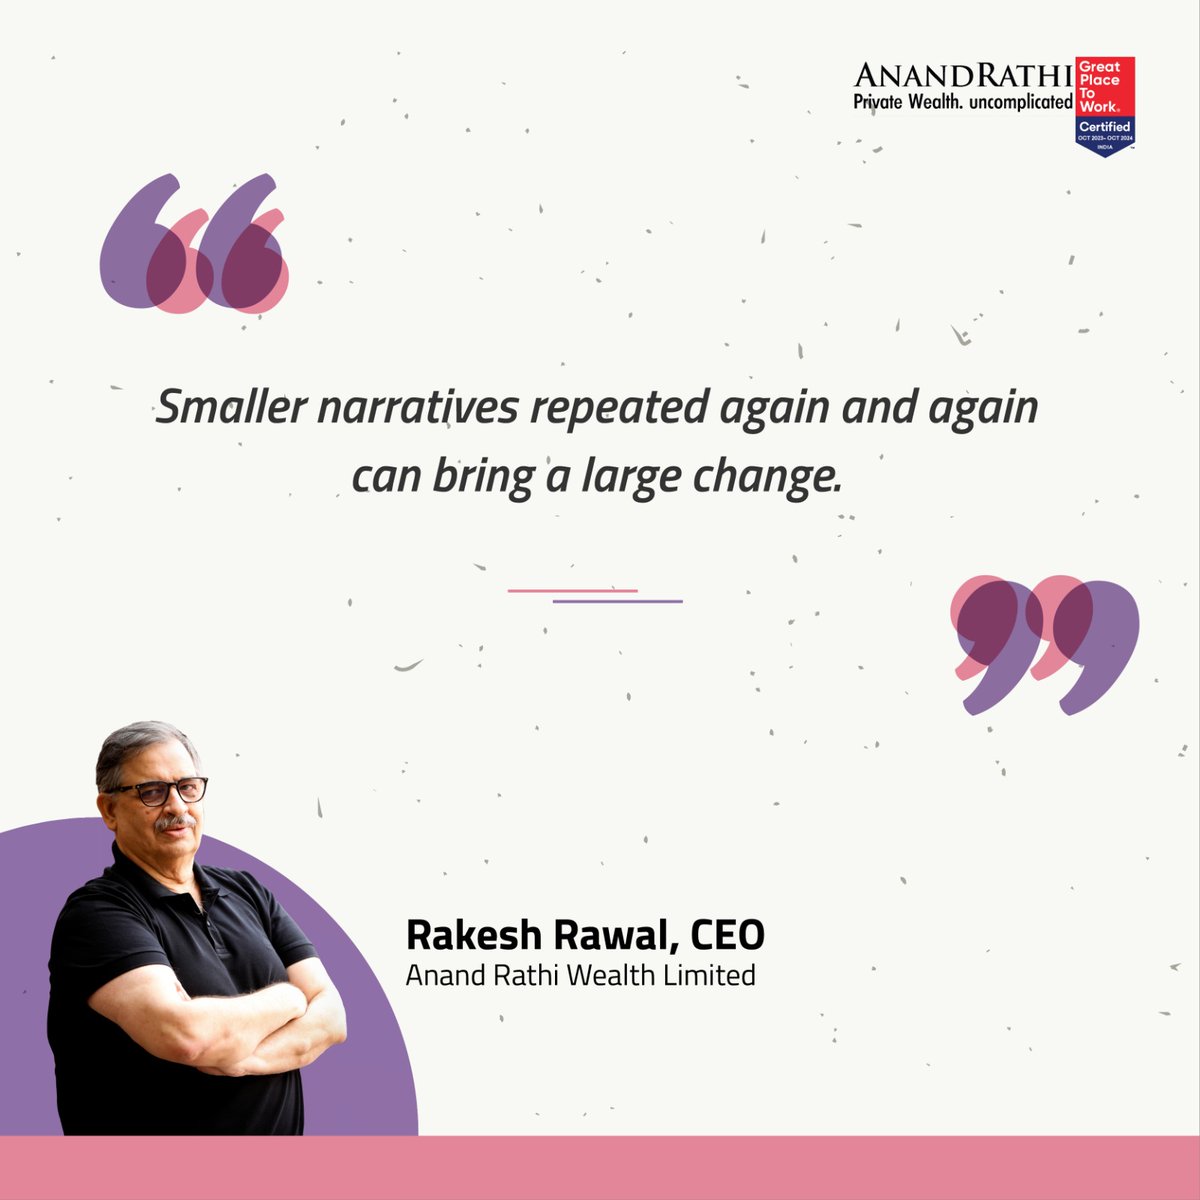 Our CEO, Rakesh Rawal emphasizes the power of consistency, noting that small, repeated narratives can lead to significant changes. Know more: anandrathiwealth.in/landing #mathematicalrevolution #financialplanning #wealthmanagement #mutualfunds #anandrathiwealth #india #indian…